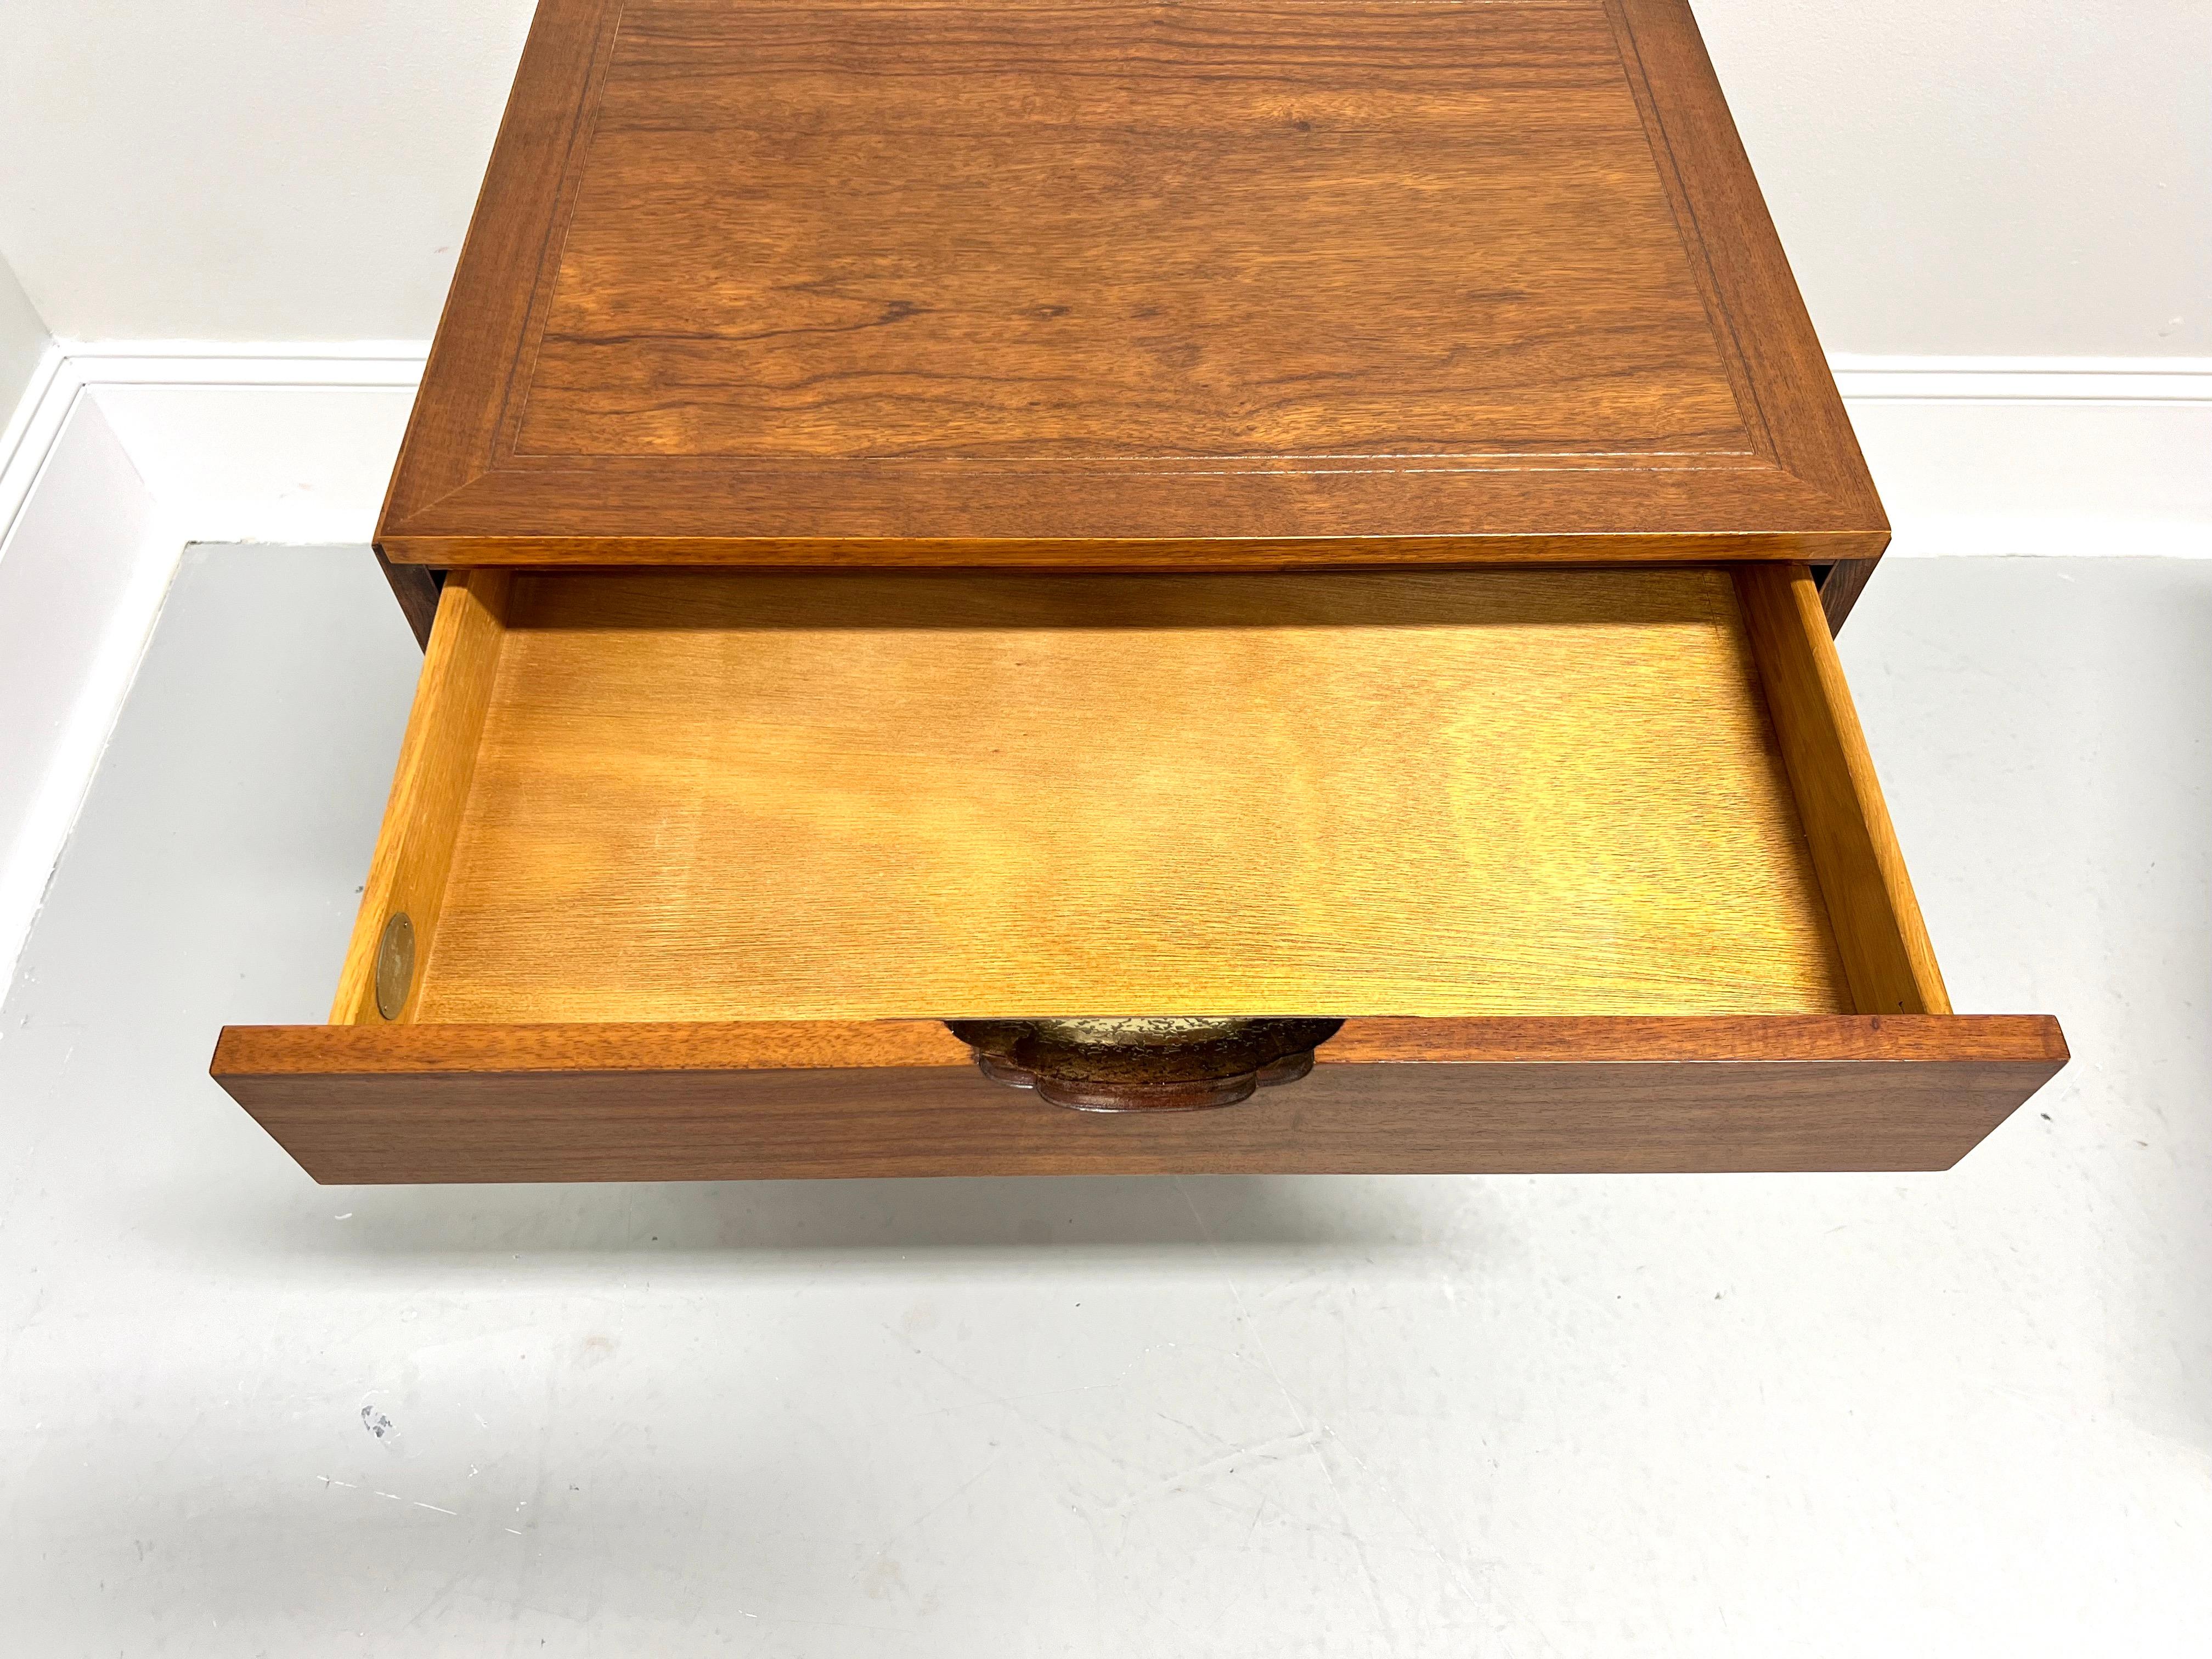 BAKER Mid 20th Century Rosewood & Walnut Asian Inspired Nightstands - Pair For Sale 4